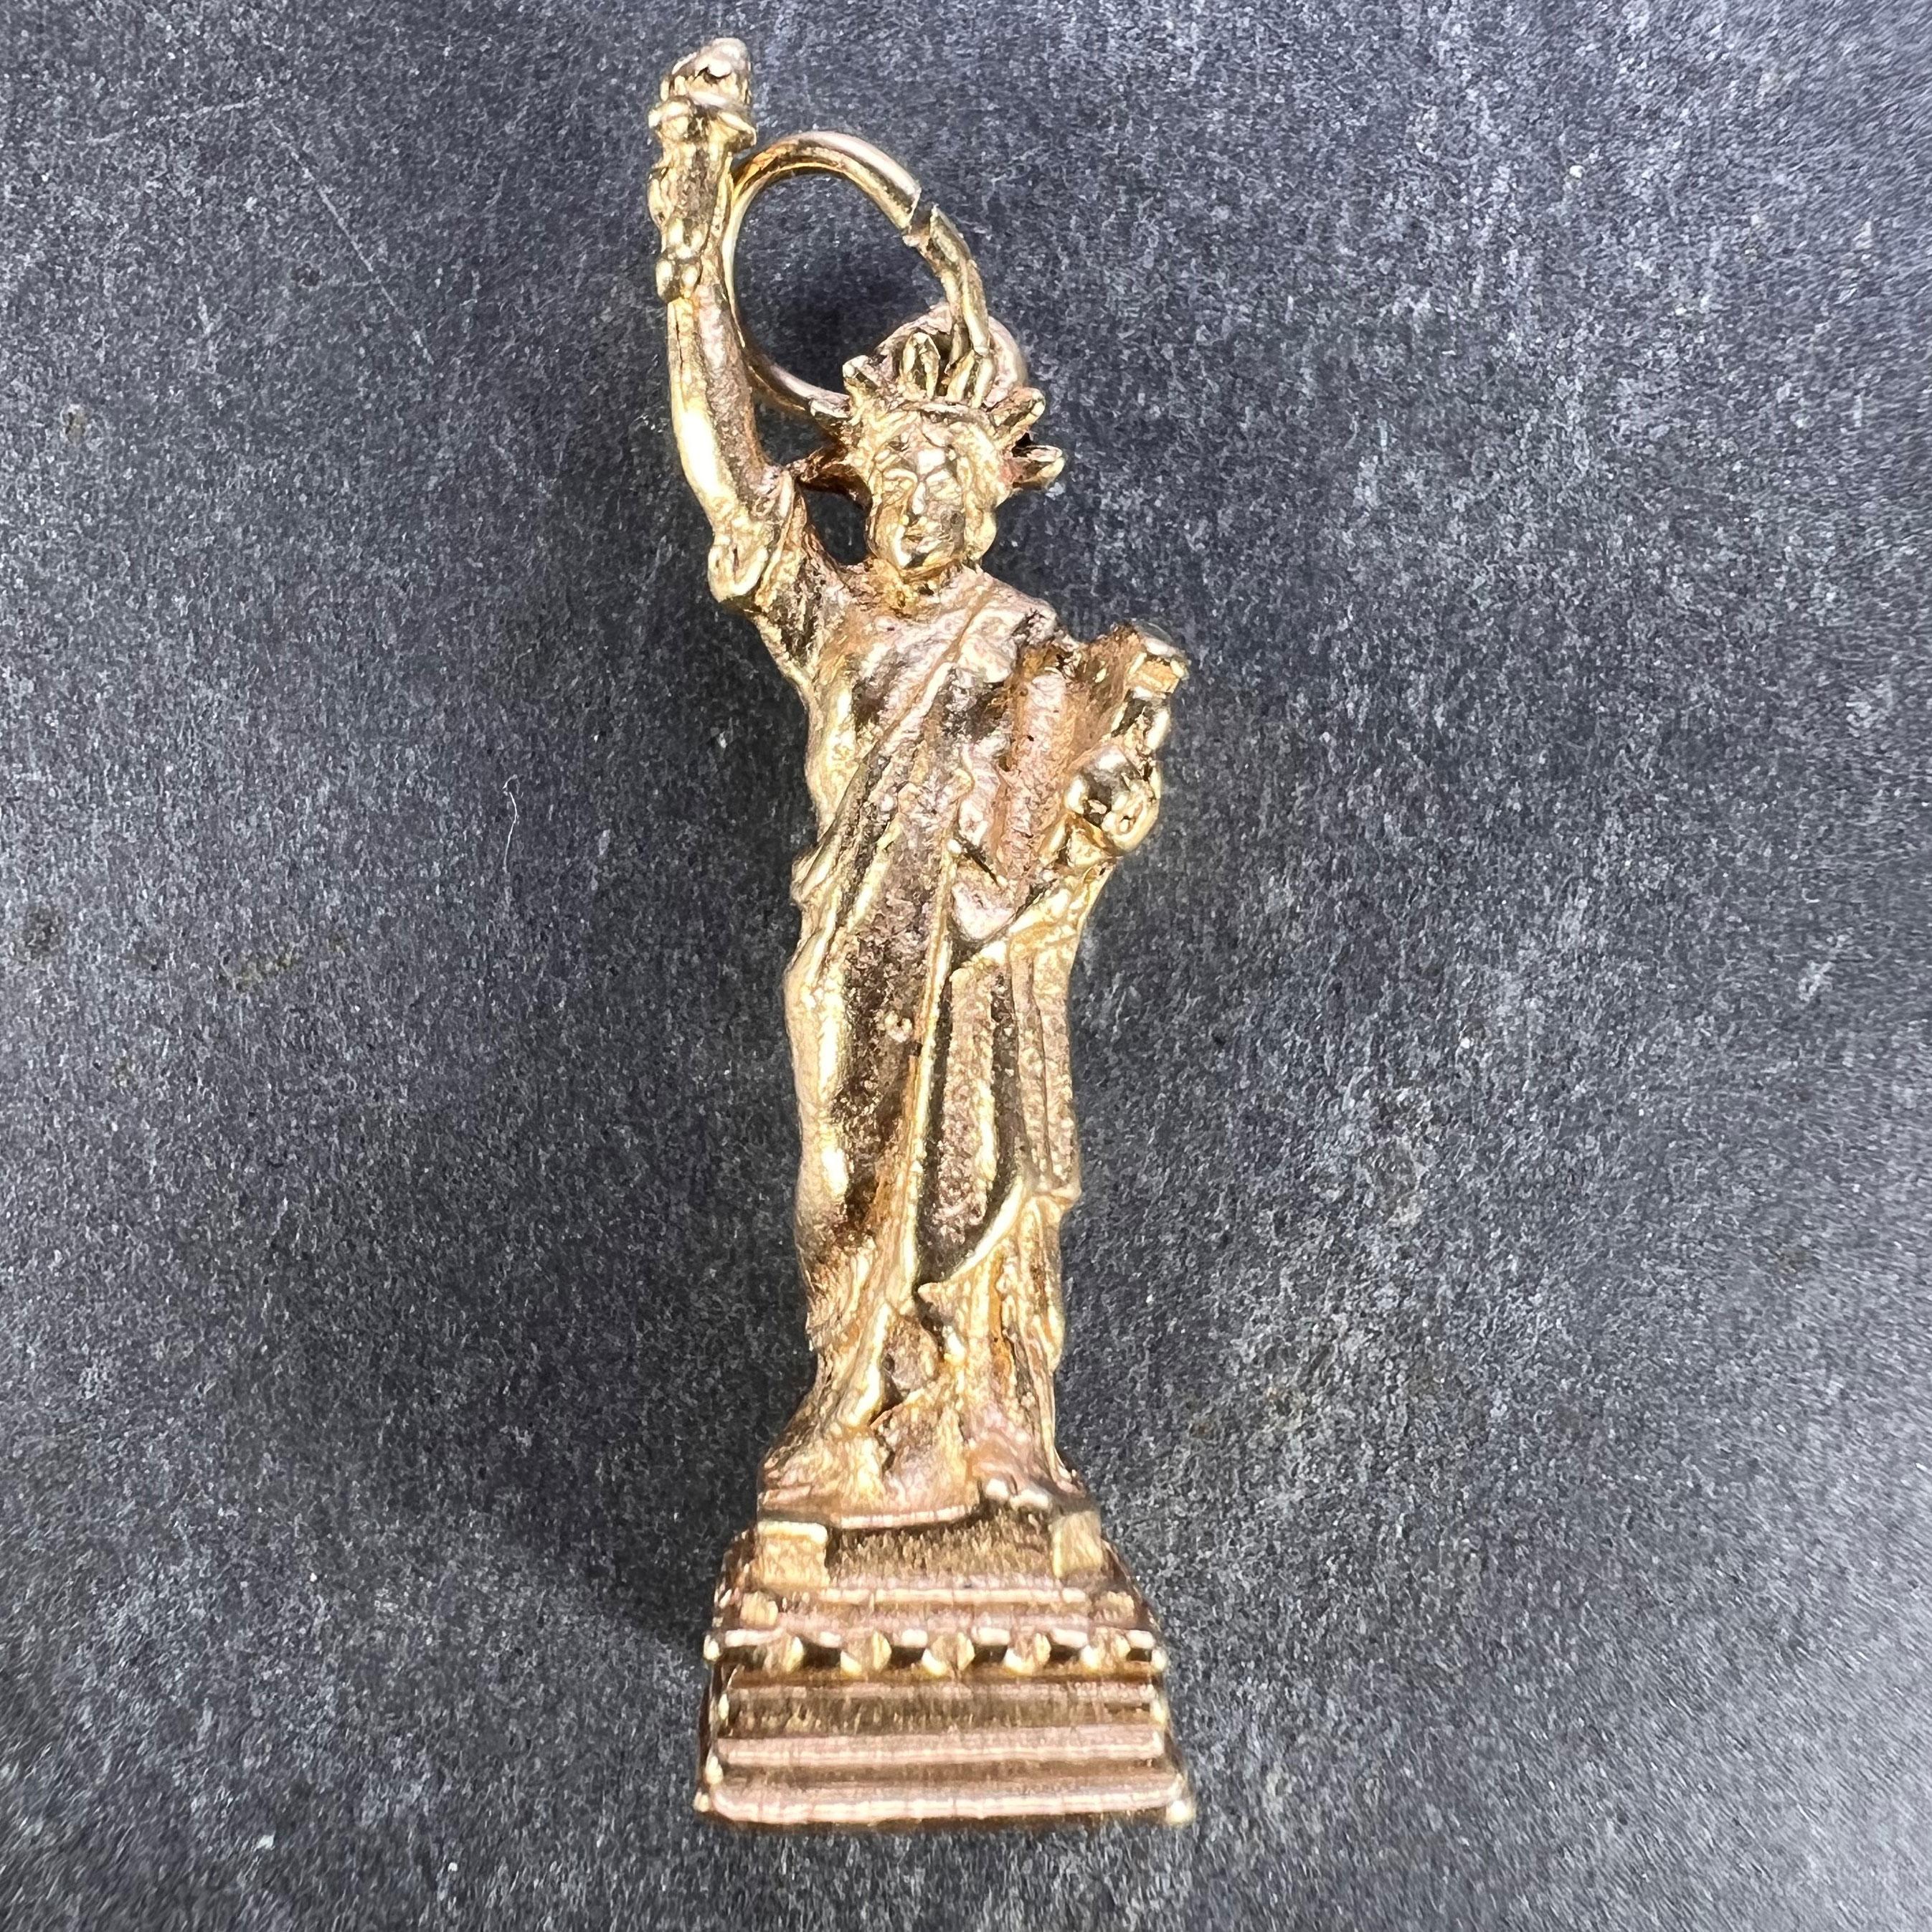 A 14 karat (14K) yellow gold charm pendant designed as the Statue of Liberty in New York. Stamped 14K to the base of the charm with the French import mark for 14 karat gold.

Measurements: 3.1 x 0.85 x 0.85 cm (not including jump ring)
Weight: 5.03